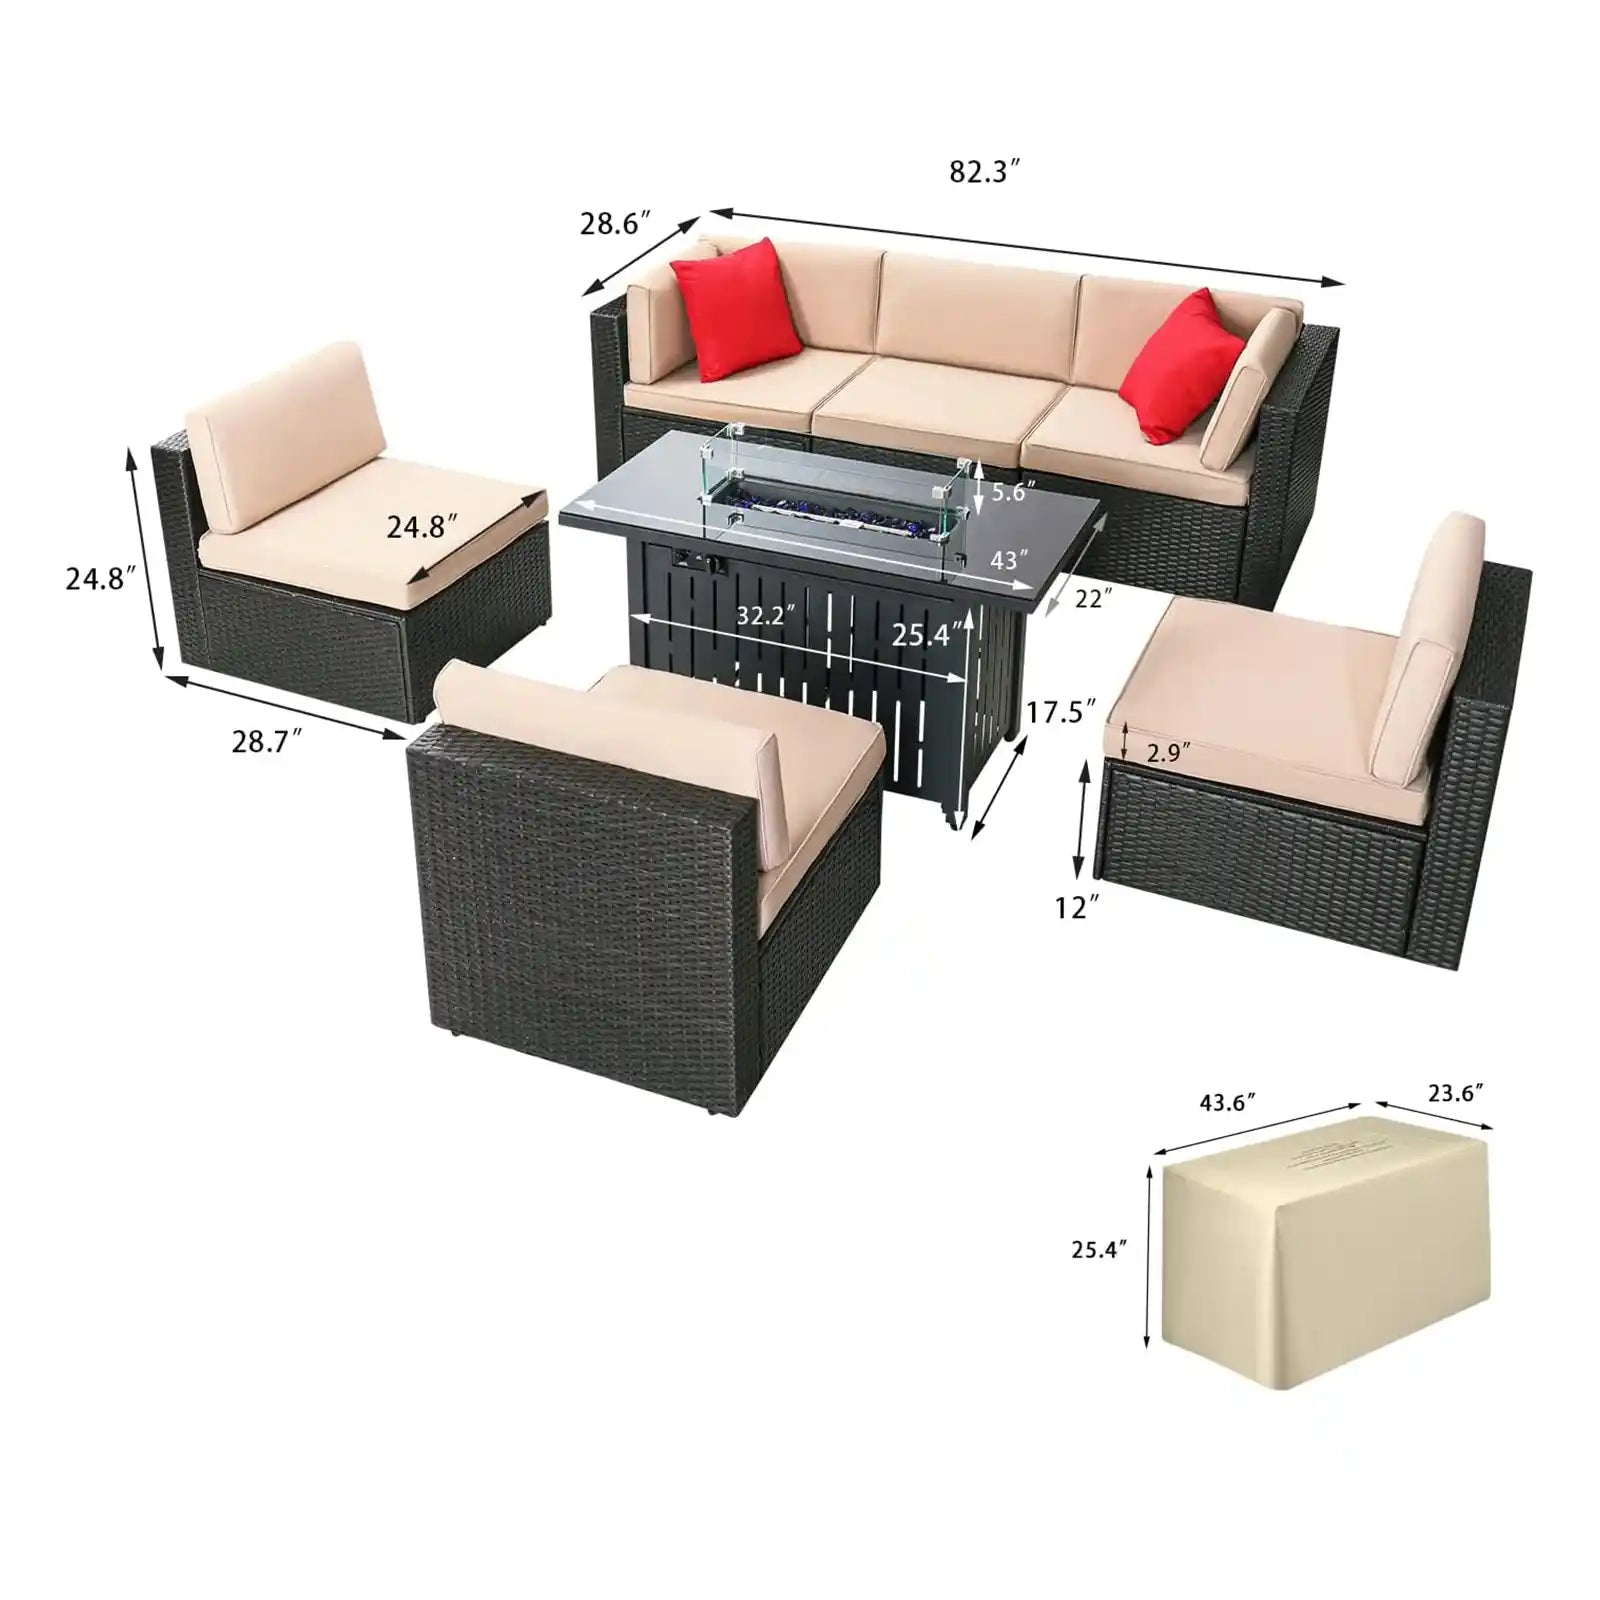 7 Pieces Outdoor Patio Furniture Set Sectional Sofa Set with Propane Fire Pit Table and Cushions for Backyard, Bistro and Poolside